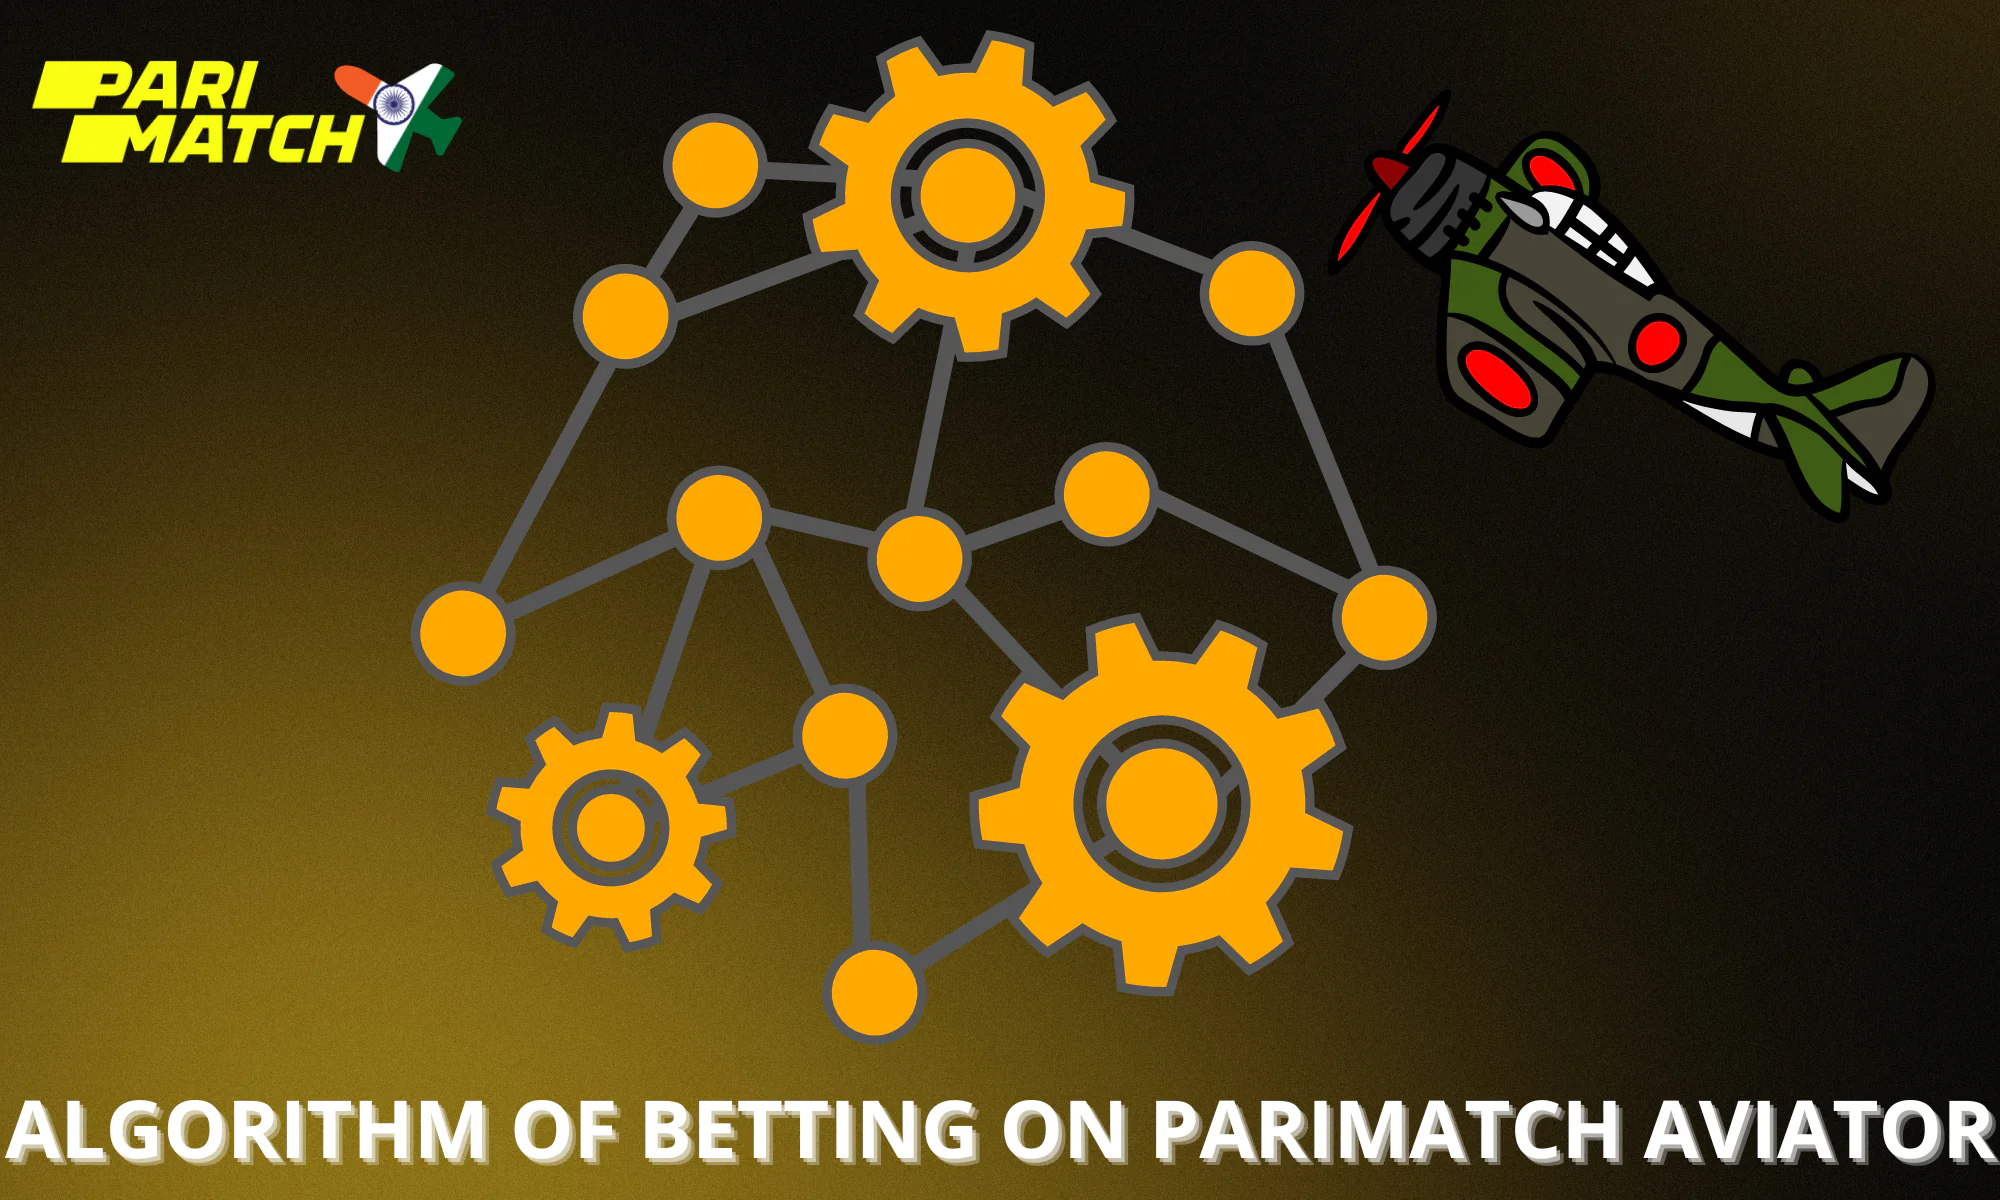 How the algorithm works in the Parimatch Aviator game